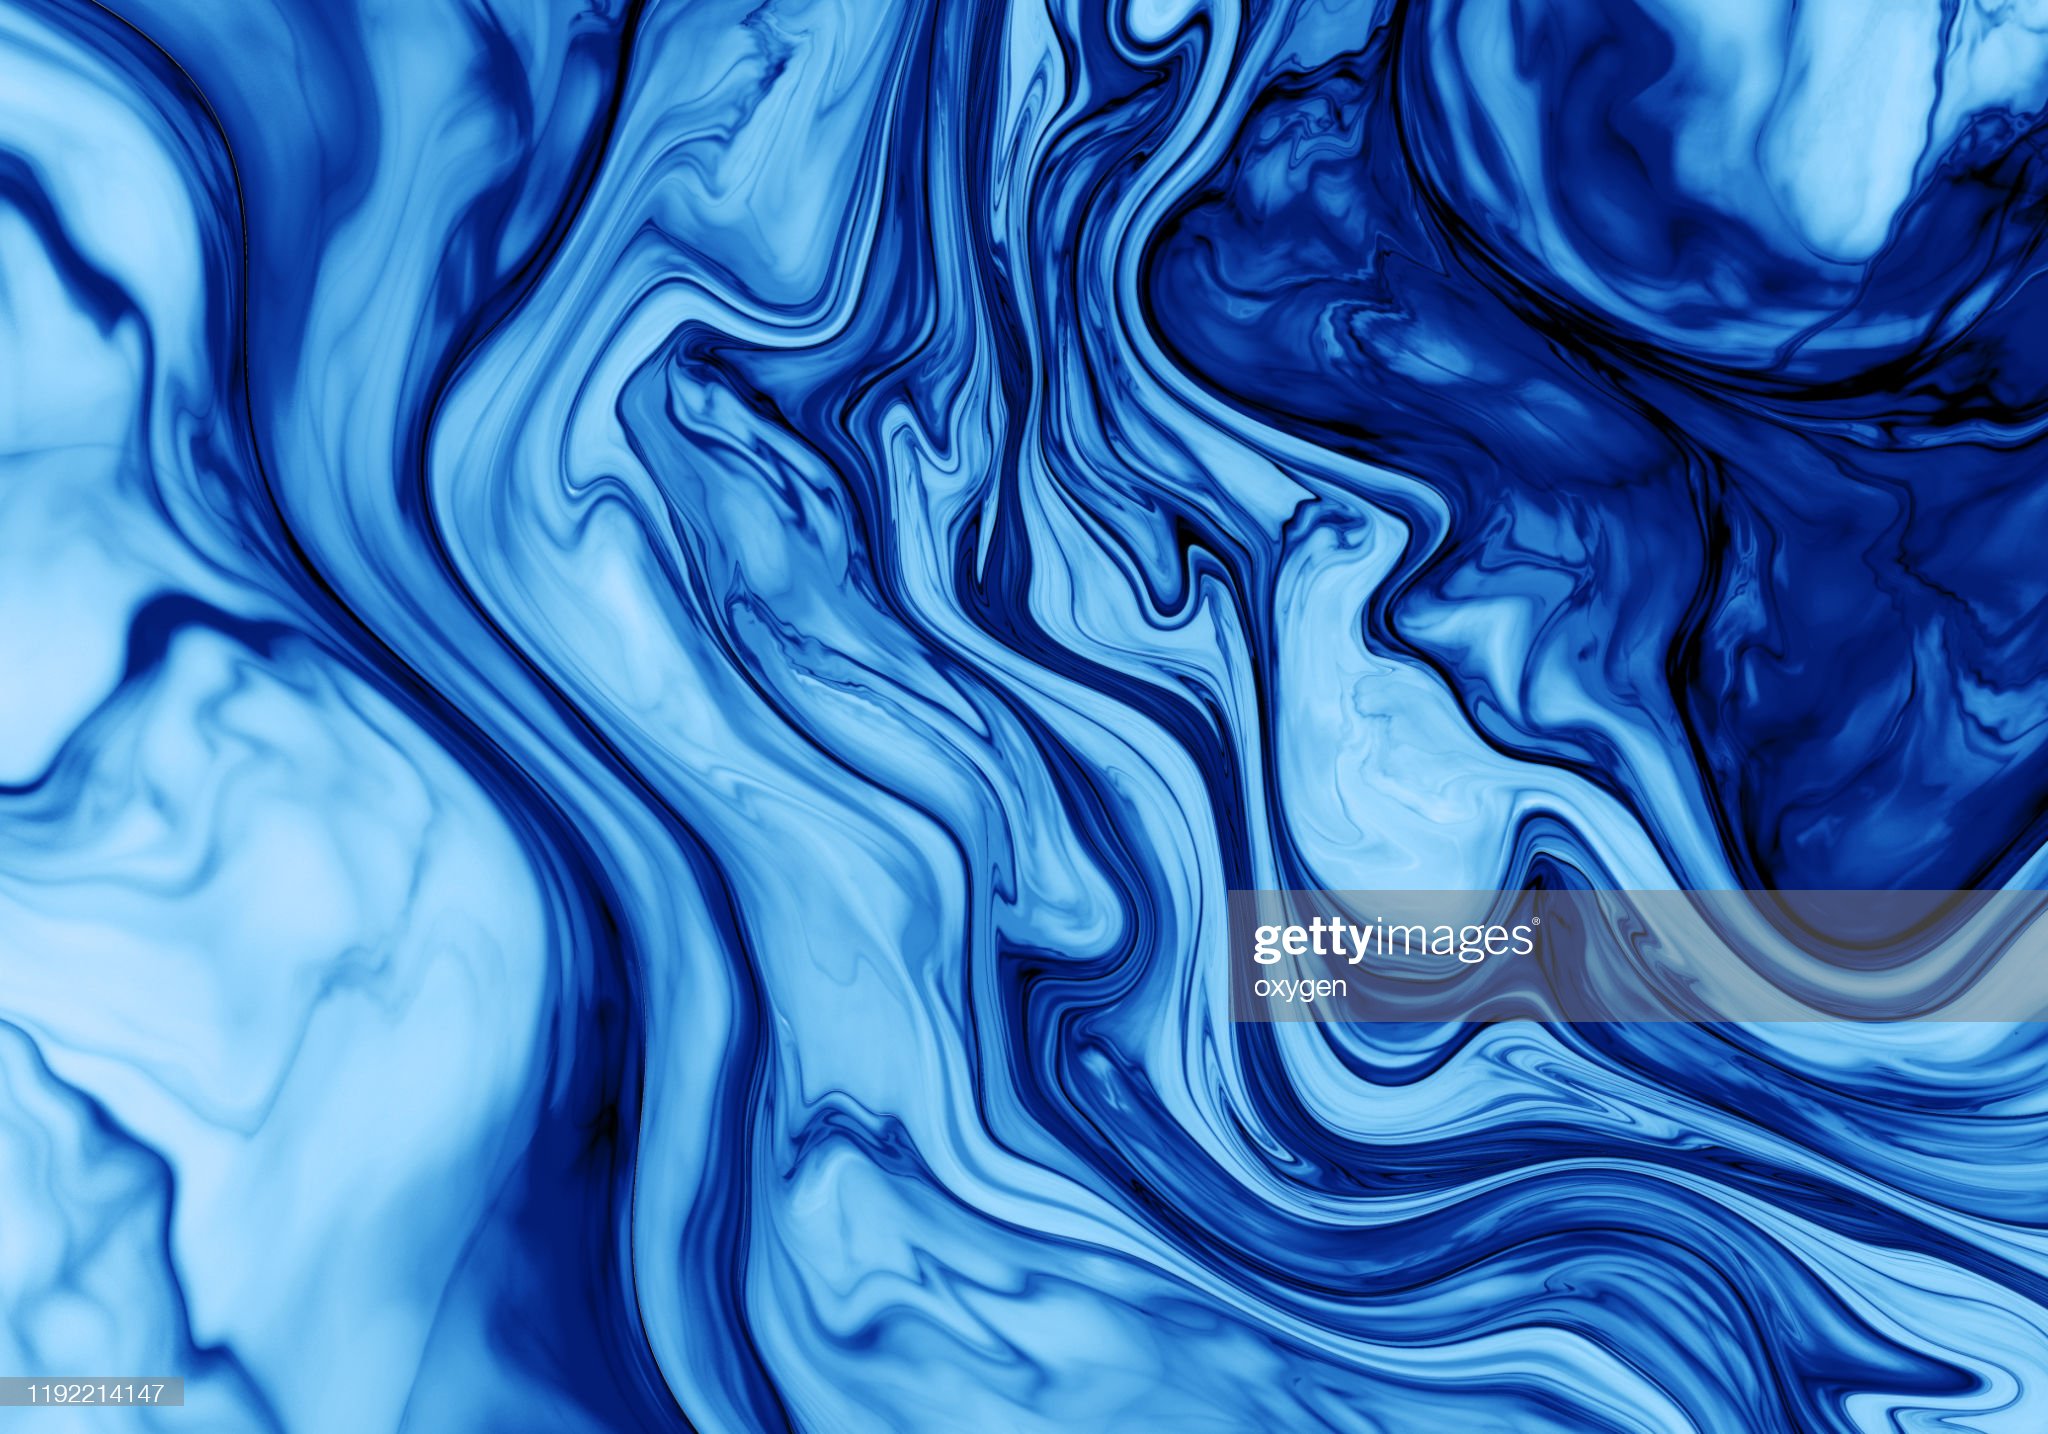 Abstract Classic Blue Marbled Background Fluid Paint Art Wavy